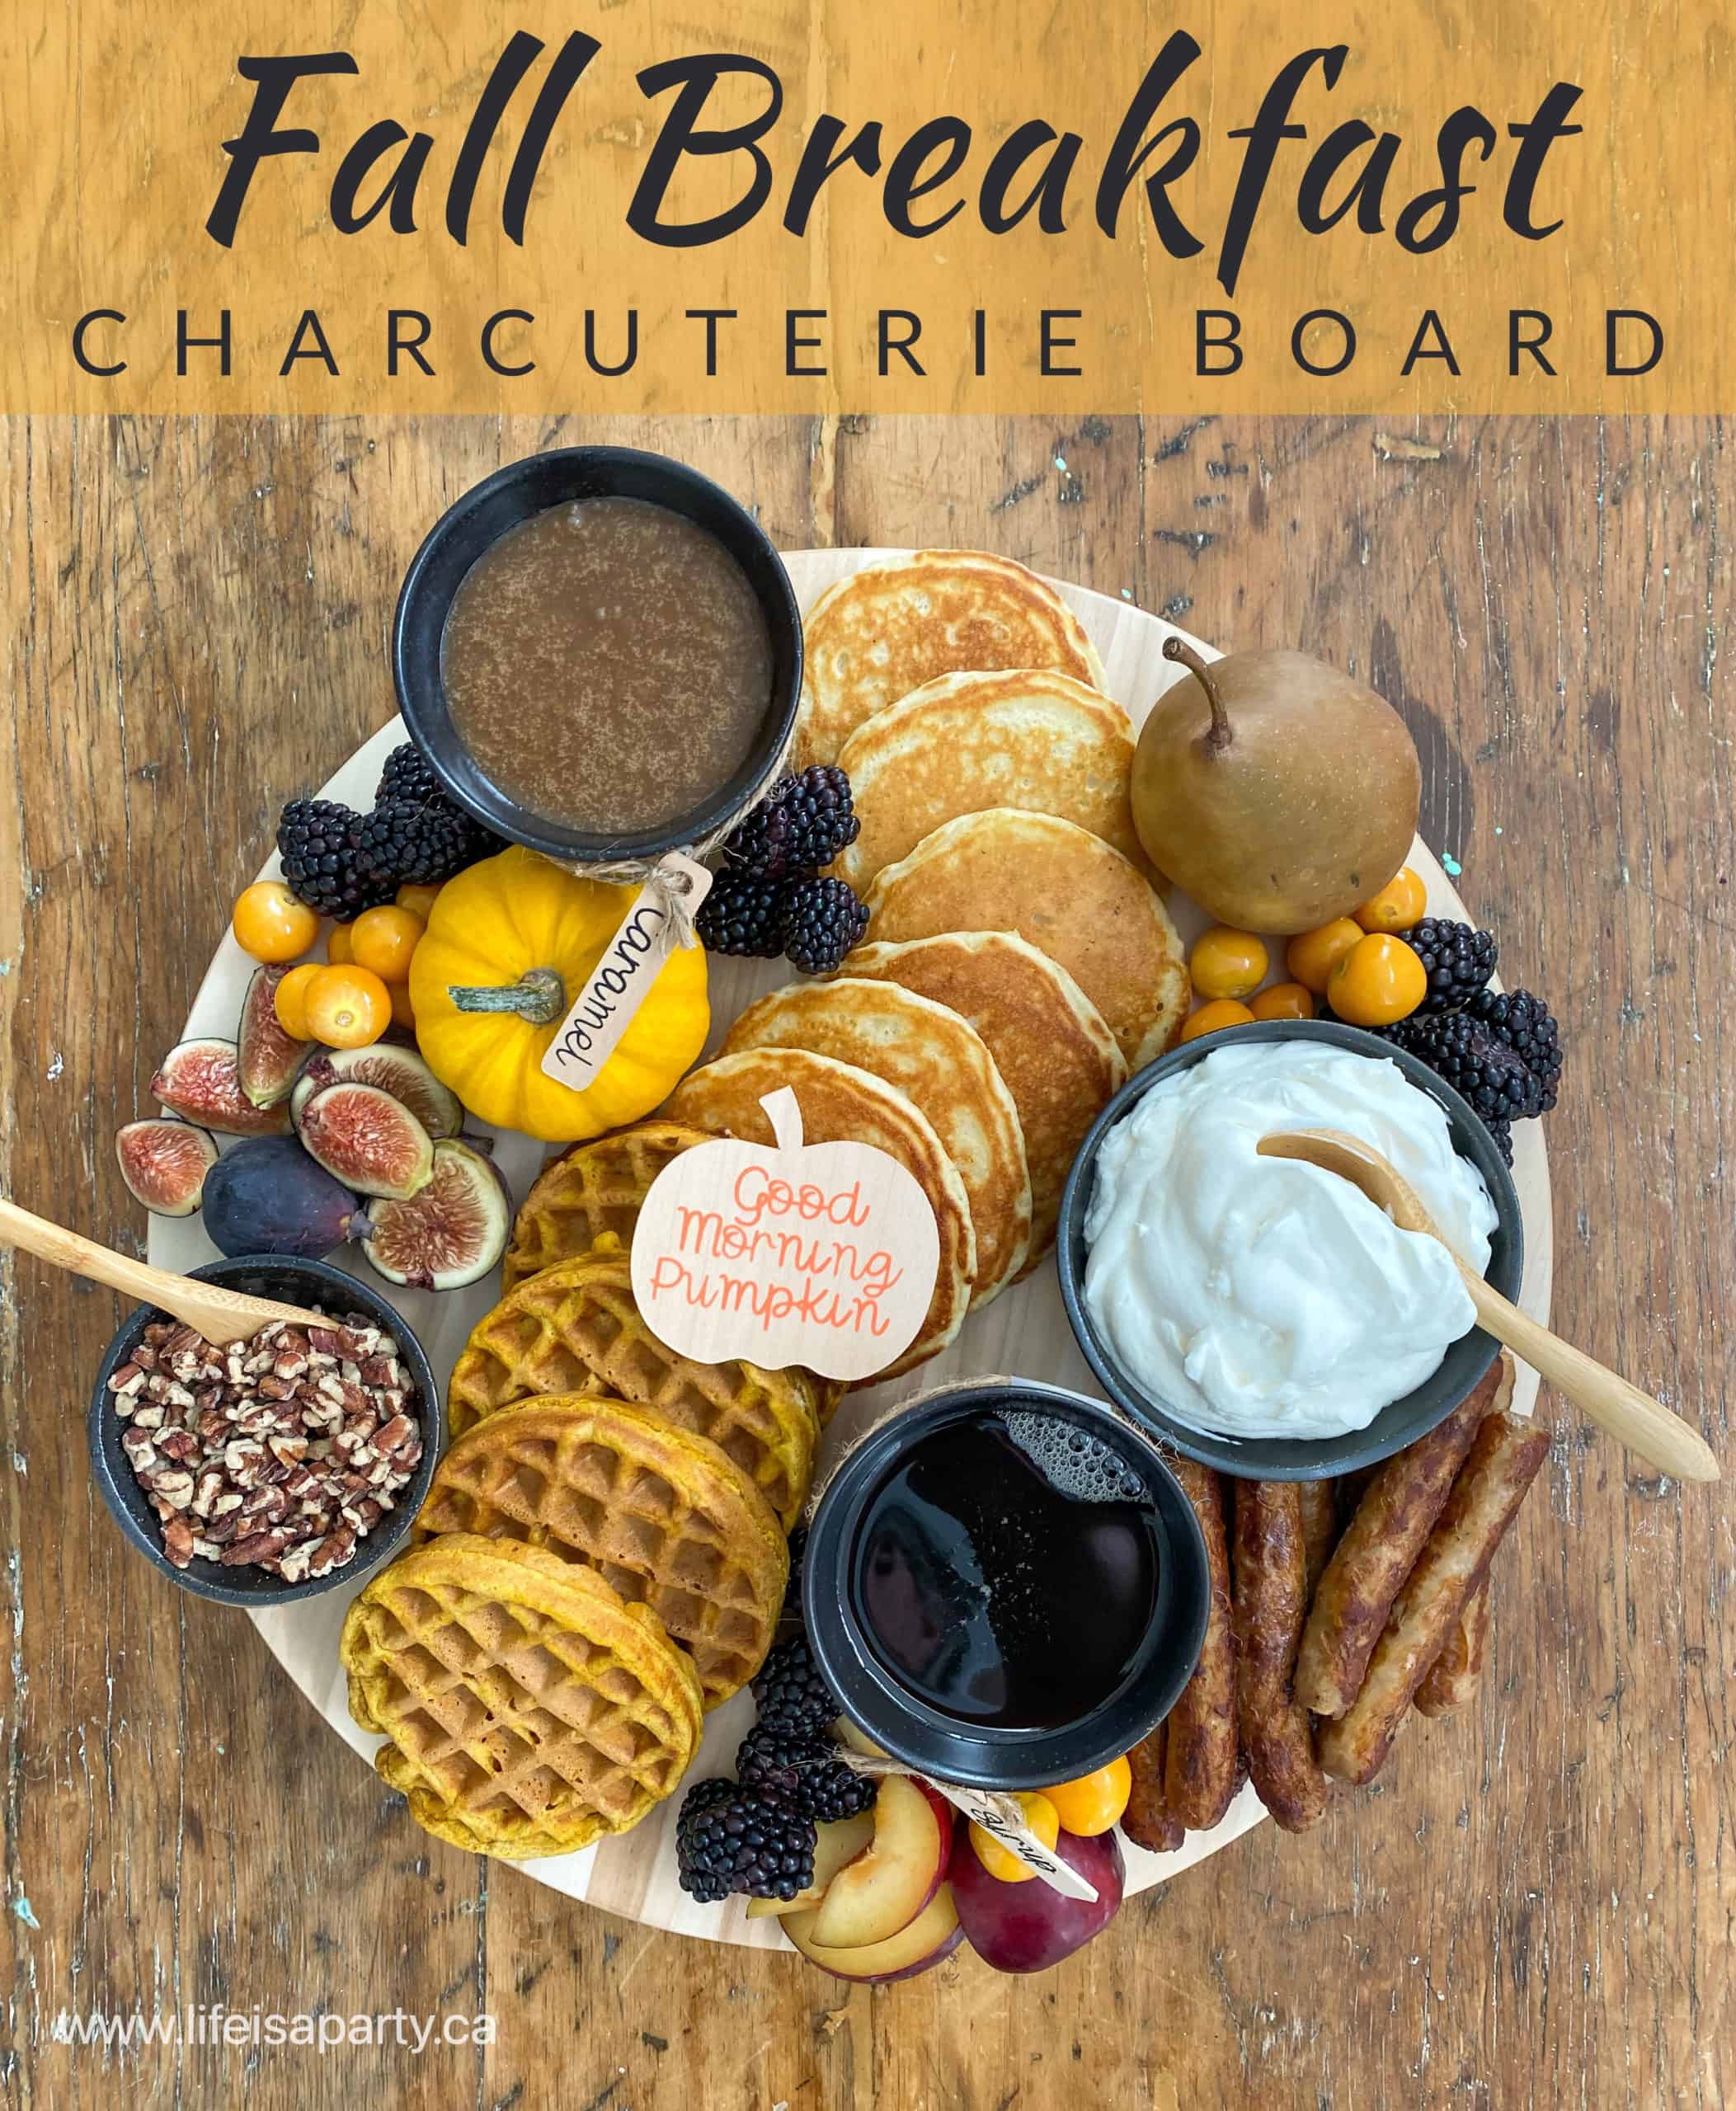 Fall Breakfast Charcuterie Board: pancakes, pumpkin waffles, sausage, syrups, whipped cream, nuts, fresh autumn fruit, and DIY Cricut labels.